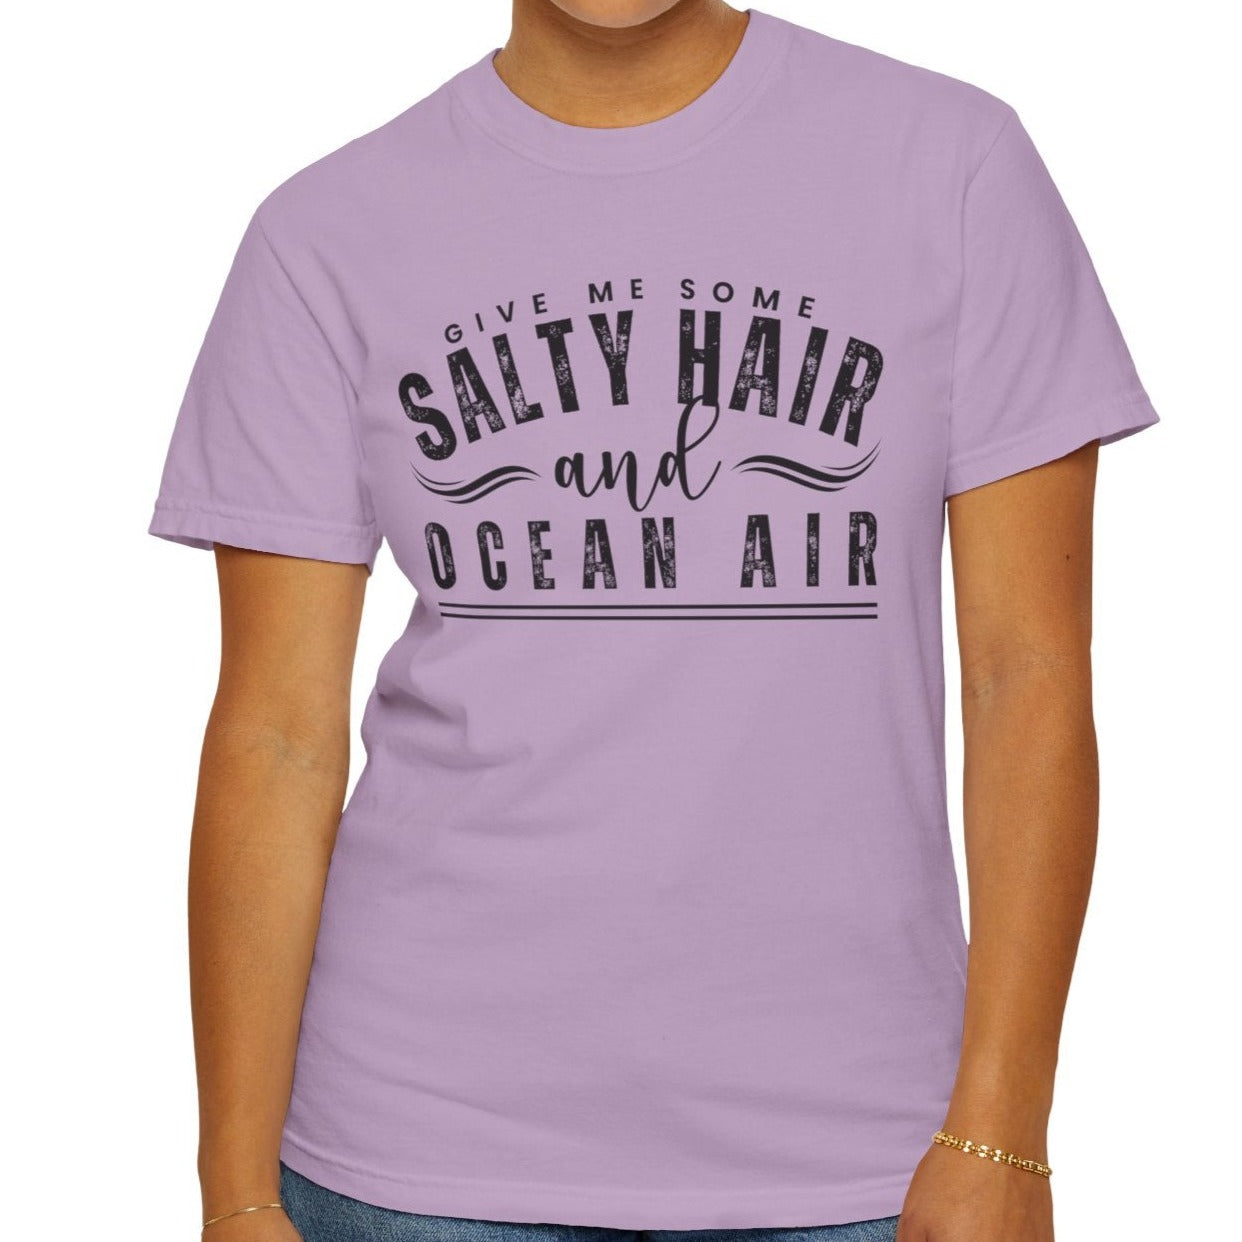 Give Me Some Salty Hair and Ocean Air Women's Comfort Color T-Shirt - Eddy and Rita